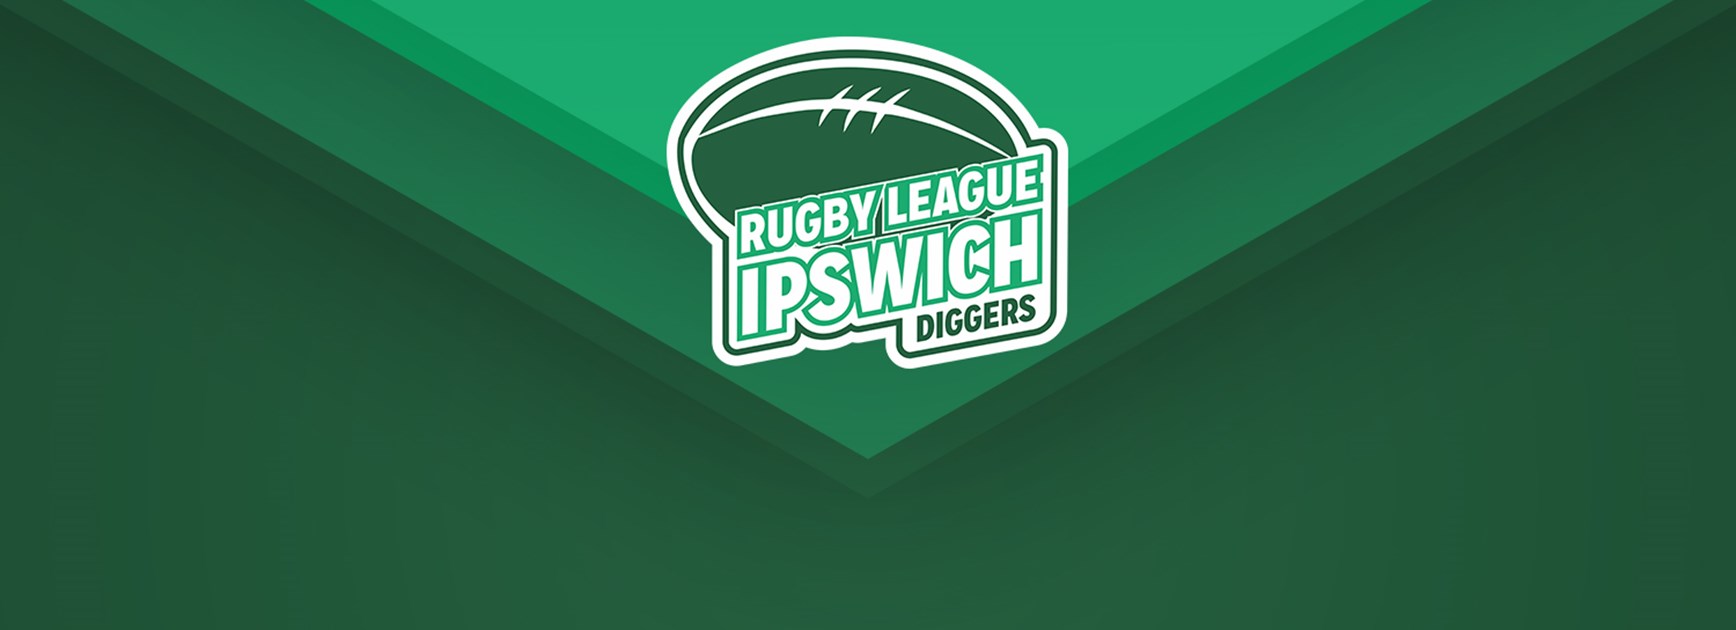 Rugby League Ipswich A Grade & Under 19 Diggers